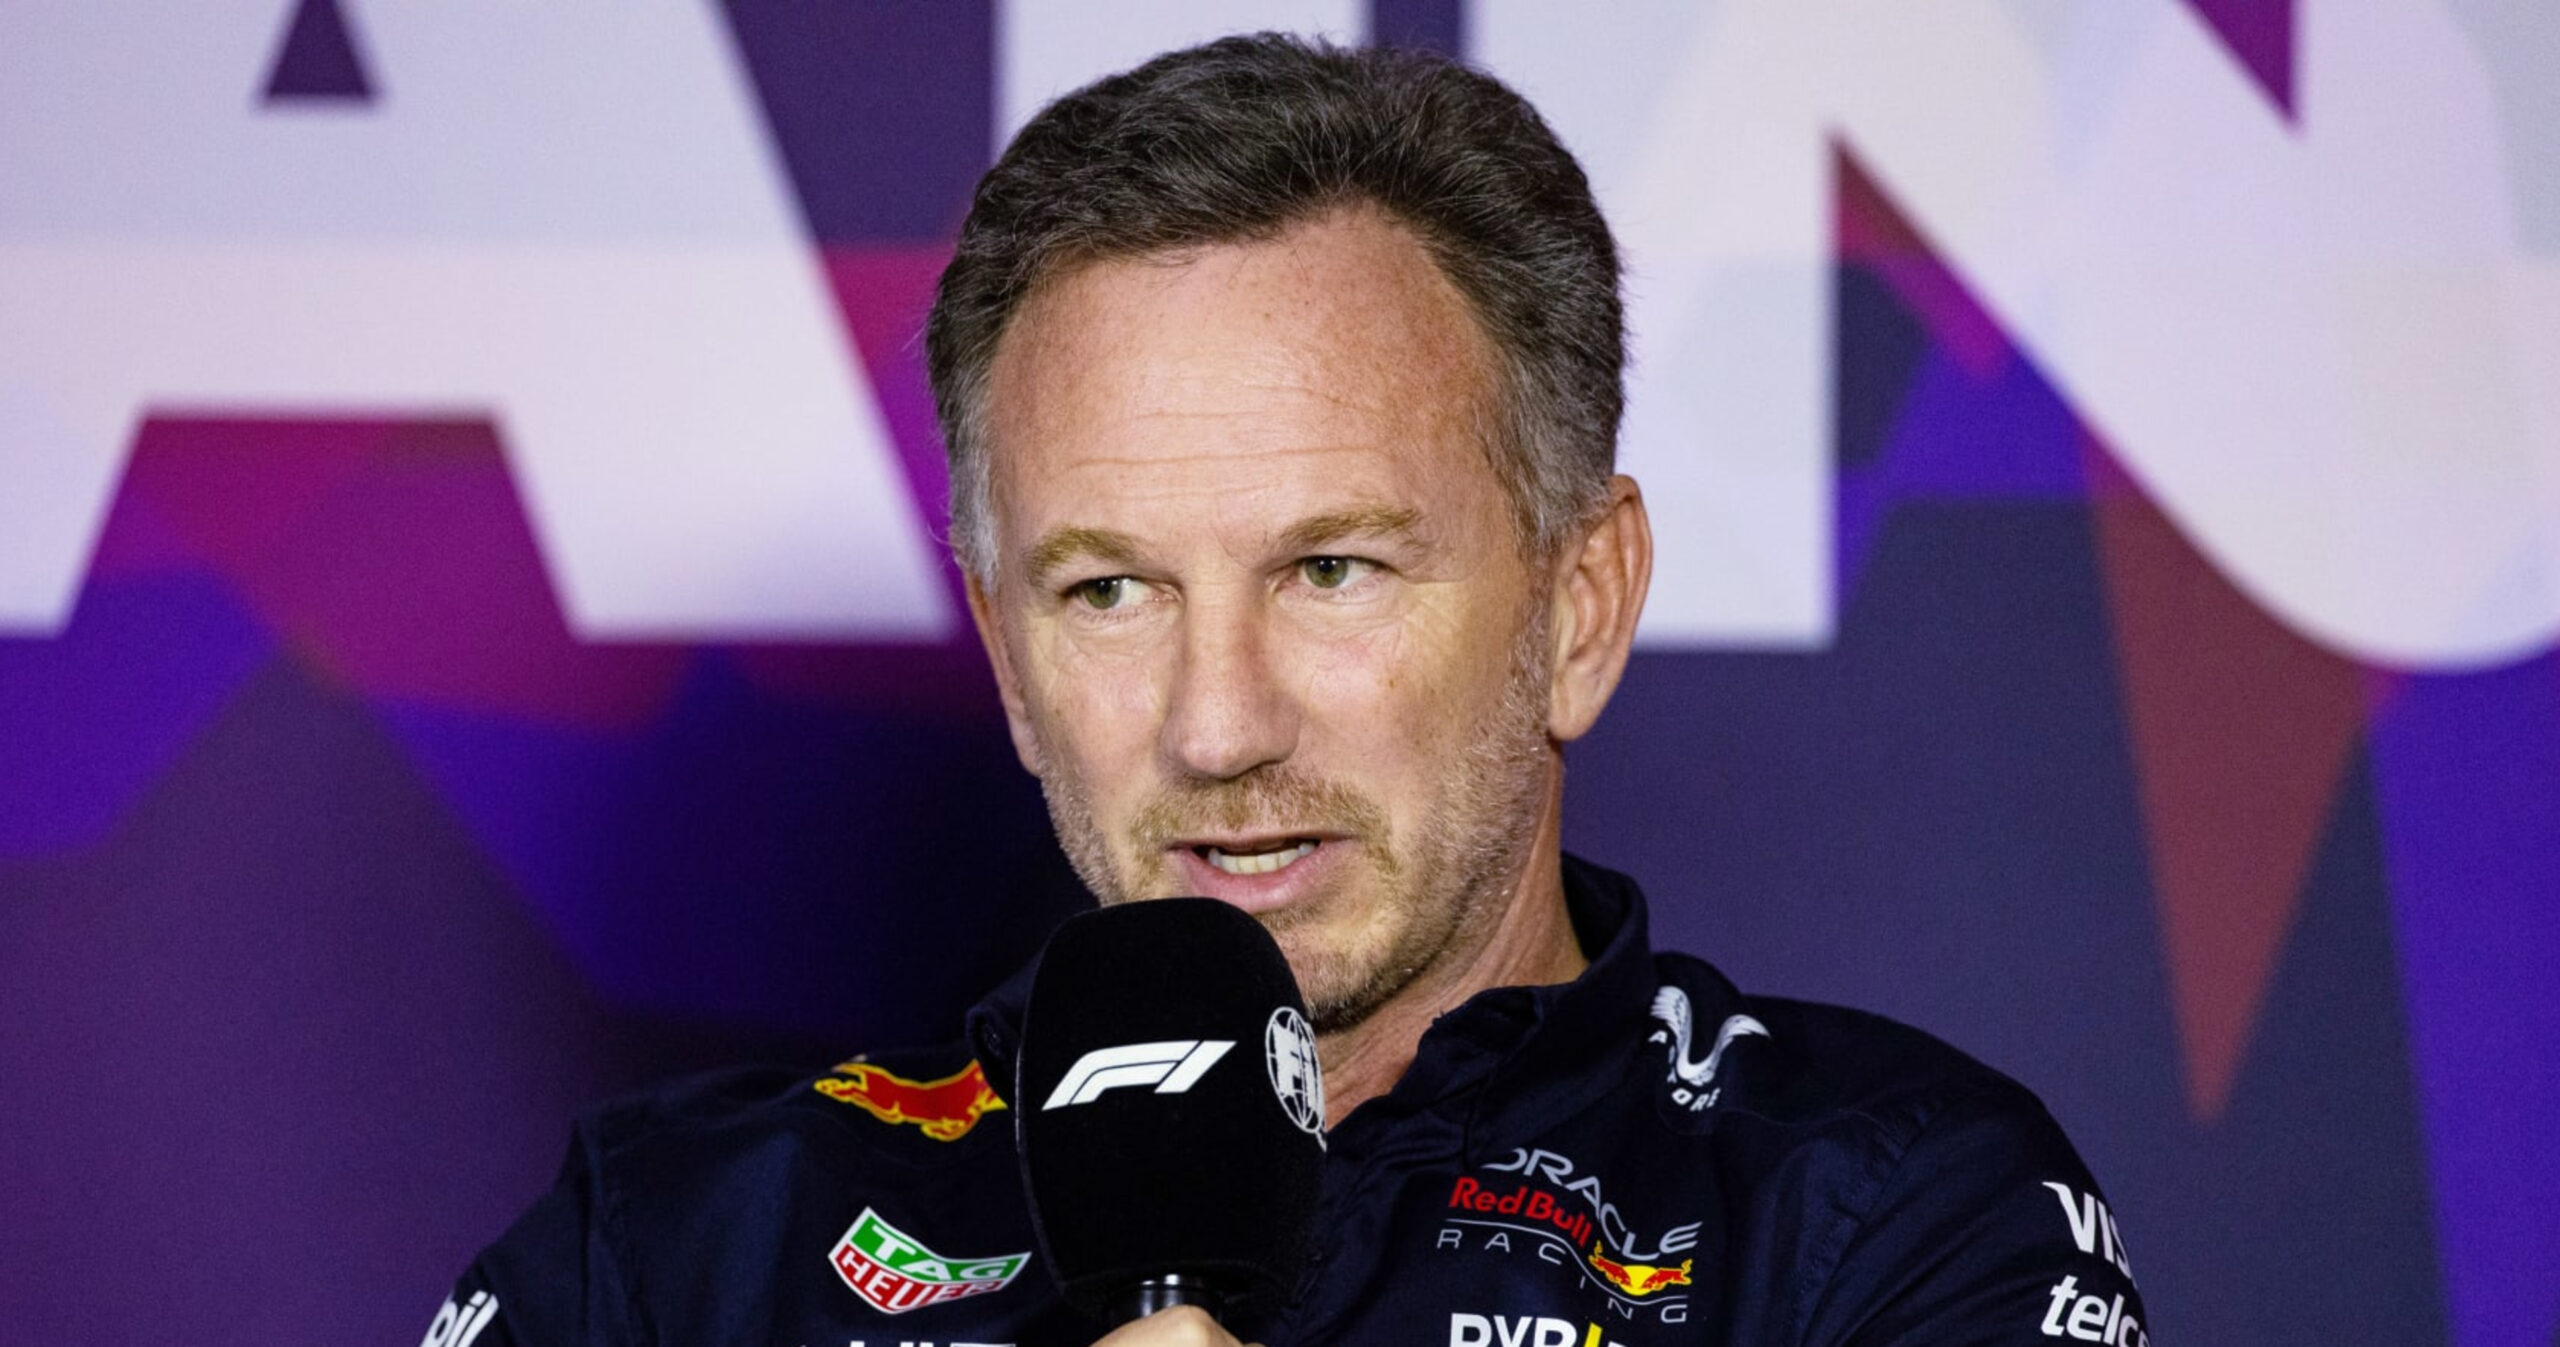 Red Bull’s Christian Horner Cleared After Investigation into Grievance by F1 Employee